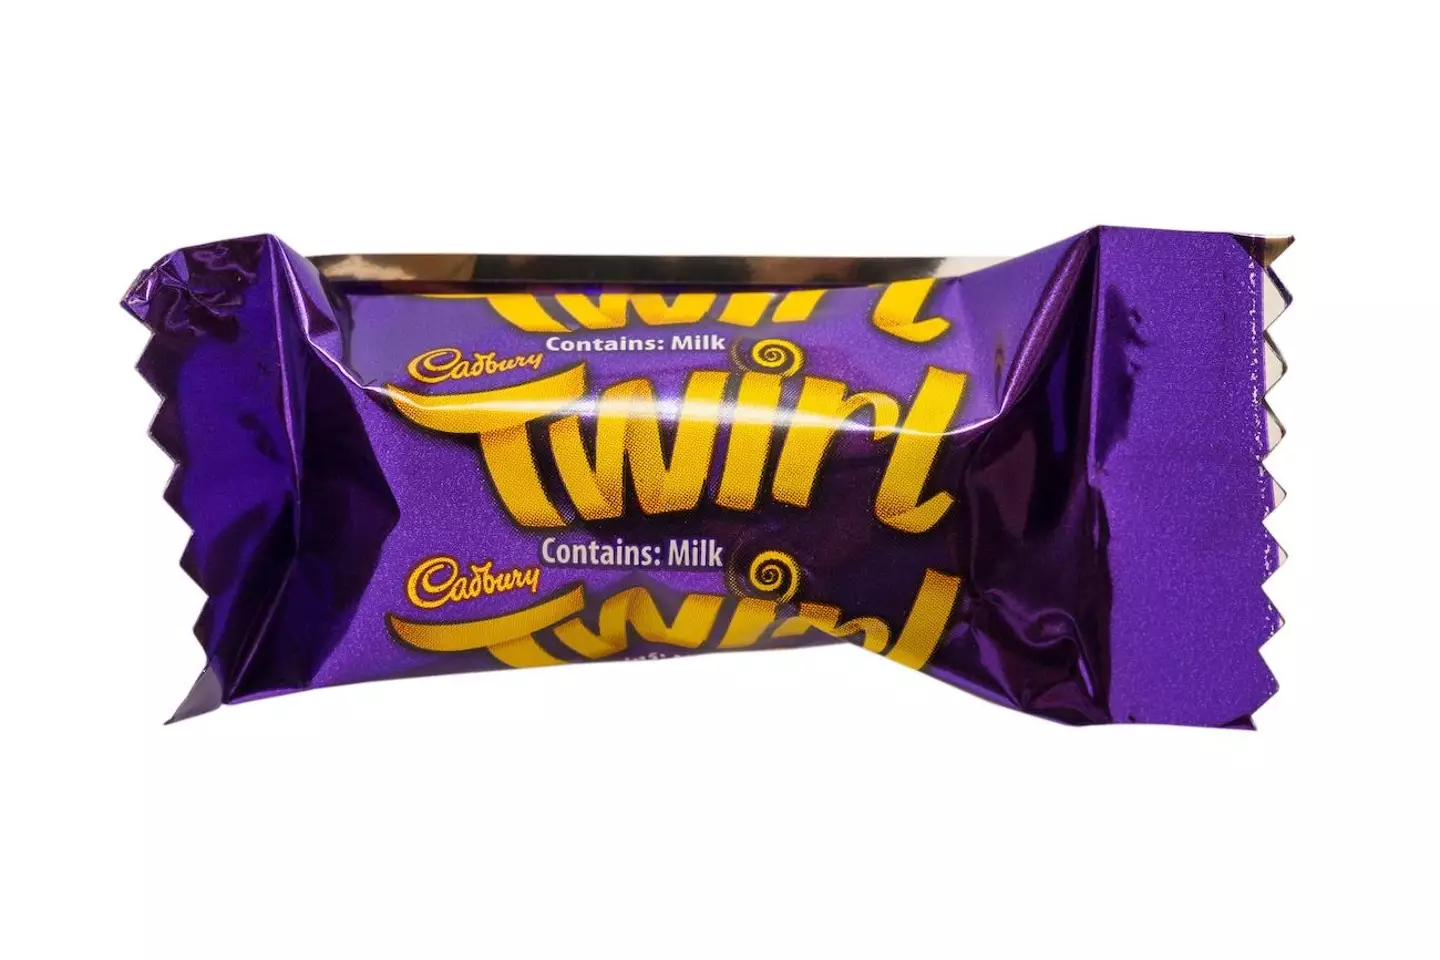 Christmas has come early for Twirl lovers as the miniature bars found in Heroes boxes are being replaced with larger versions of the iconic chocolate.